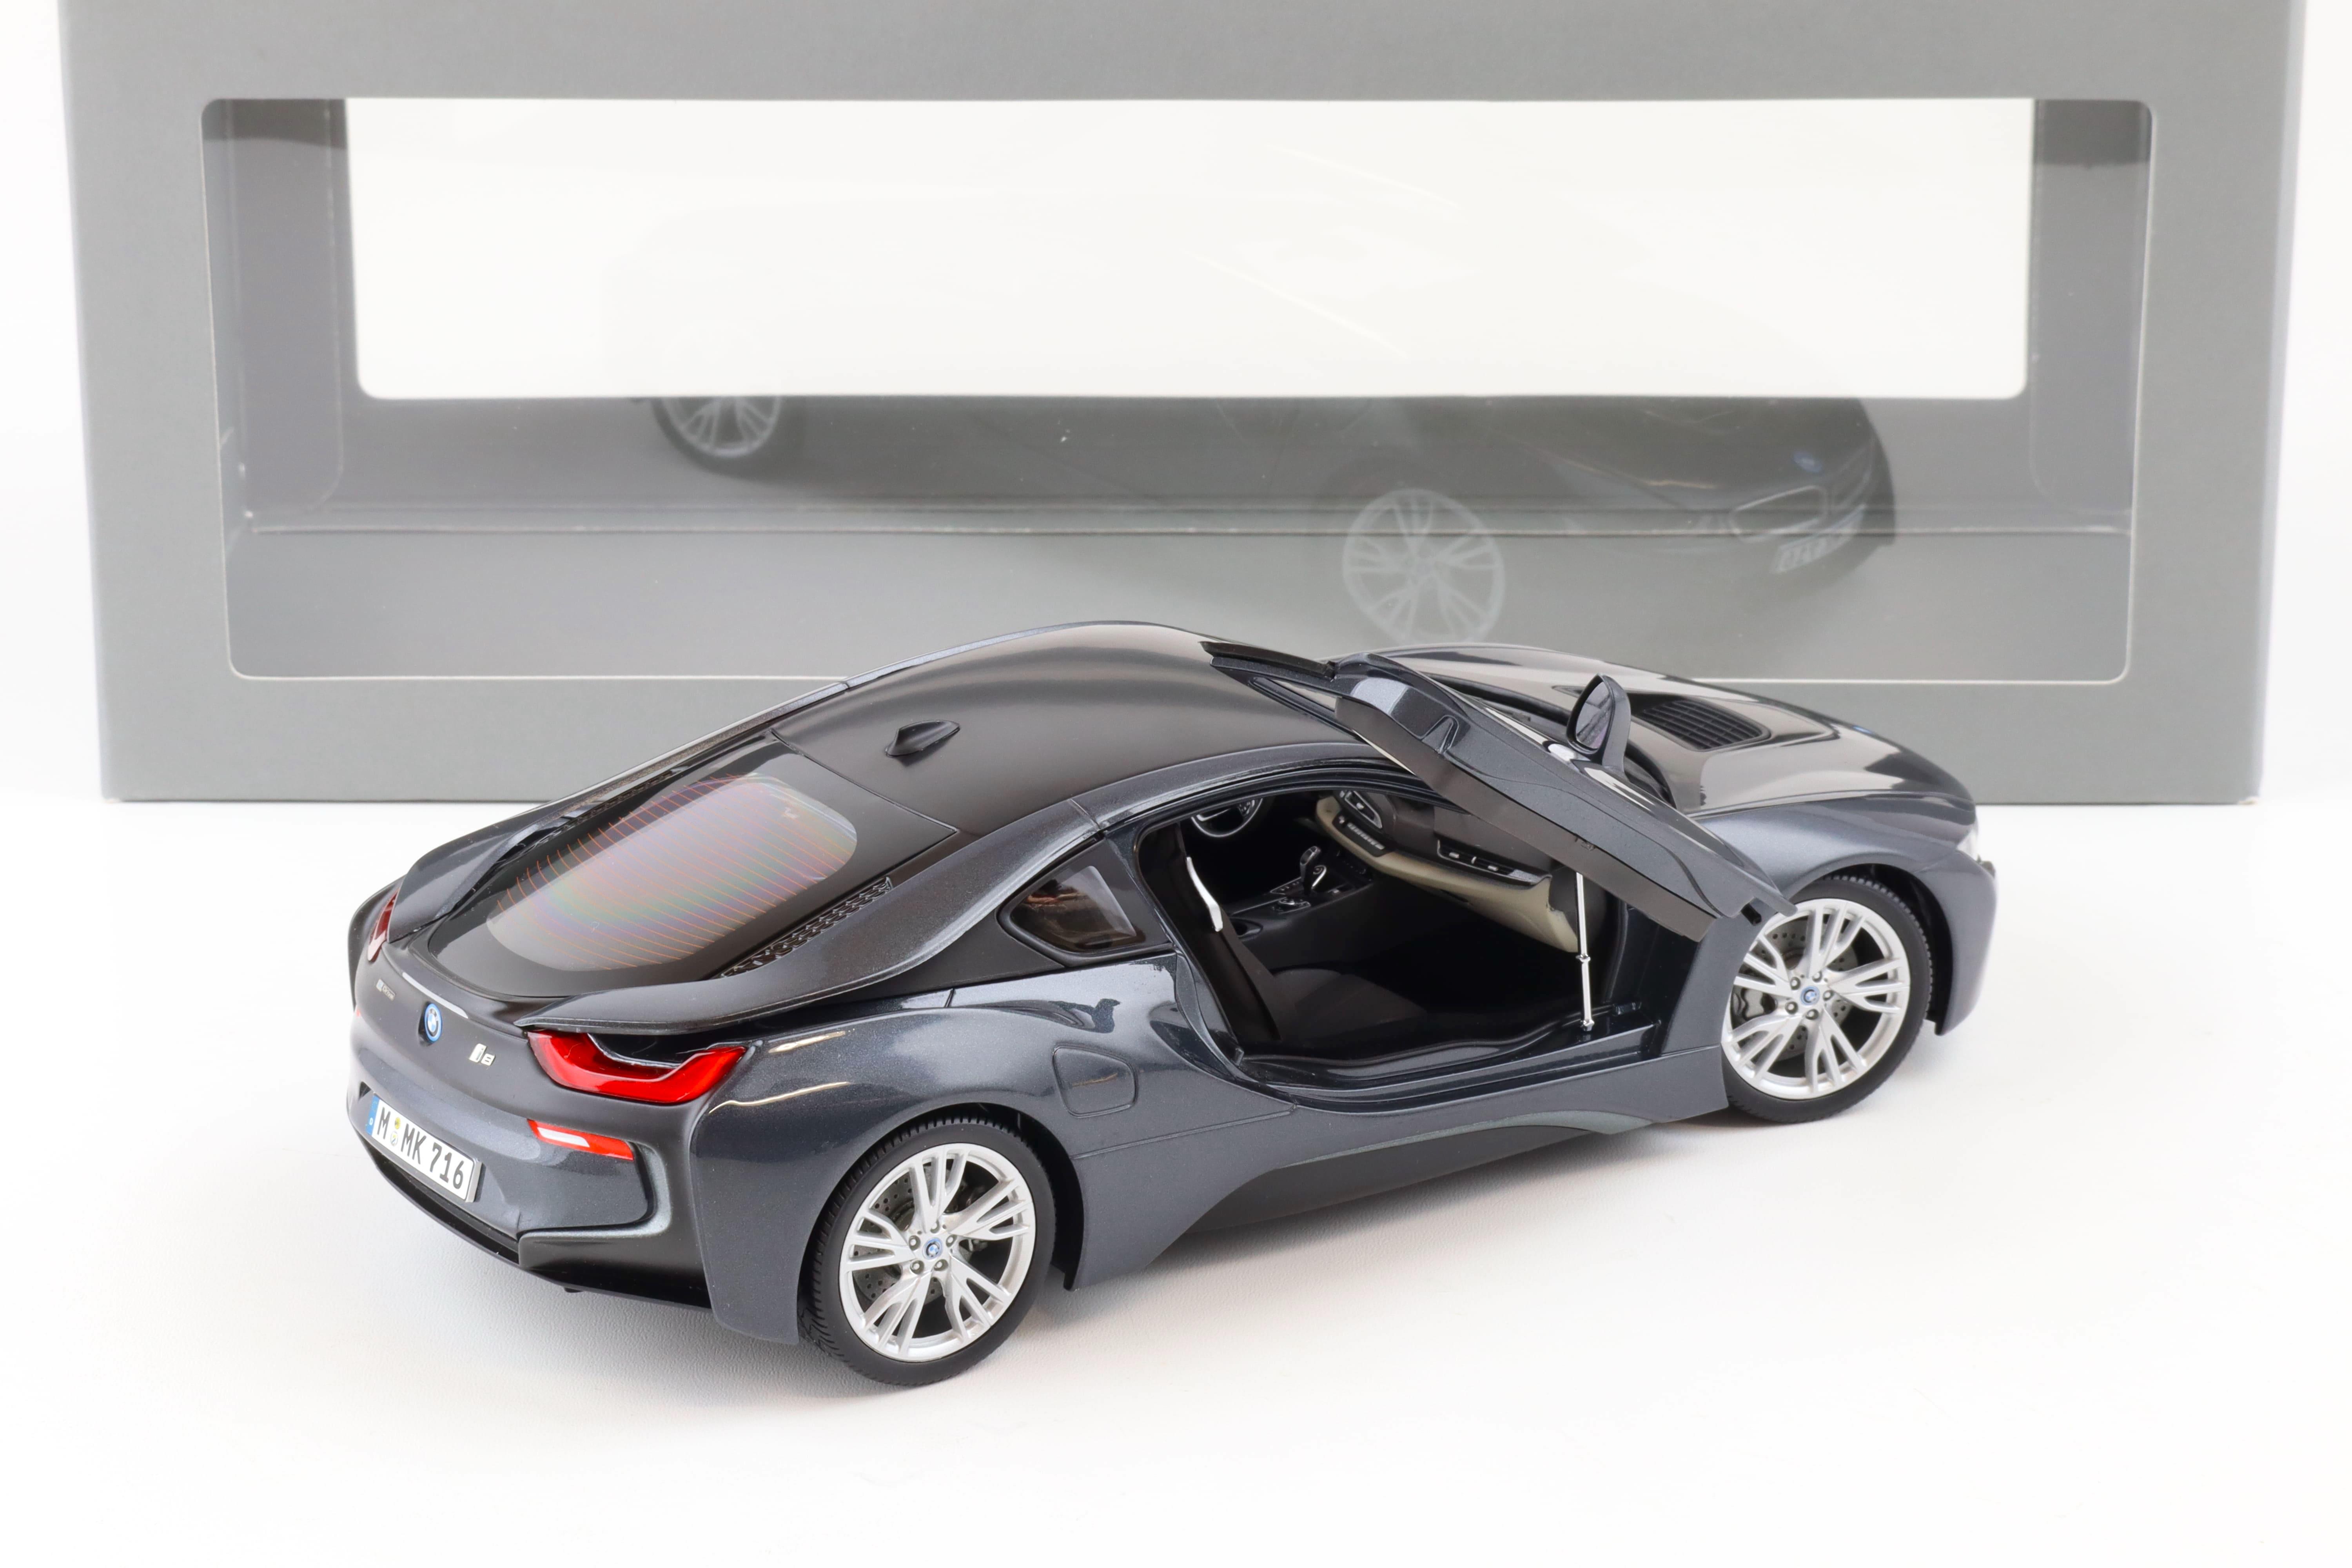 1:18 Paragon 2013 BMW i8 Coupe Sophisto grey and frozen grey